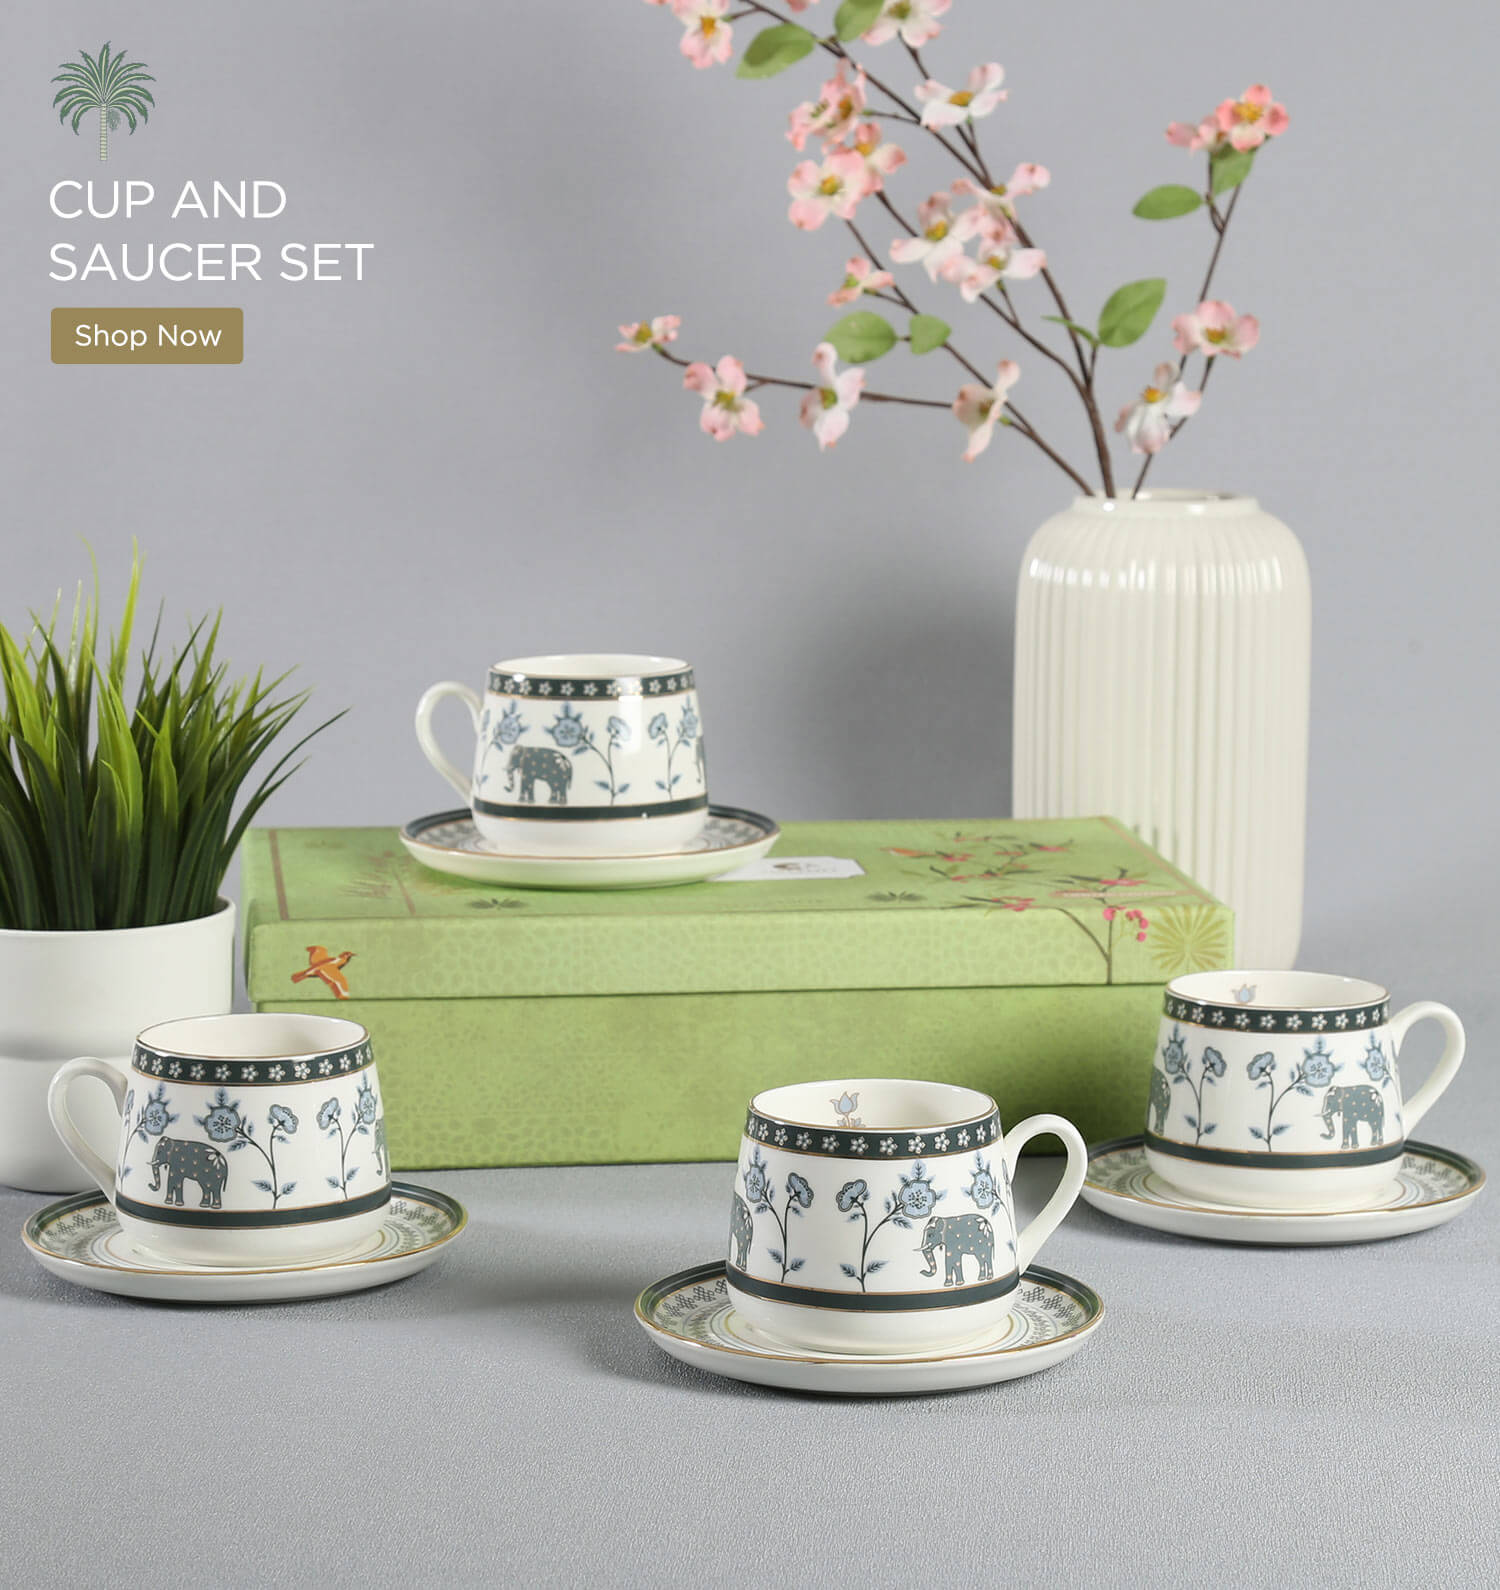 Buy Cup and Saucer Online